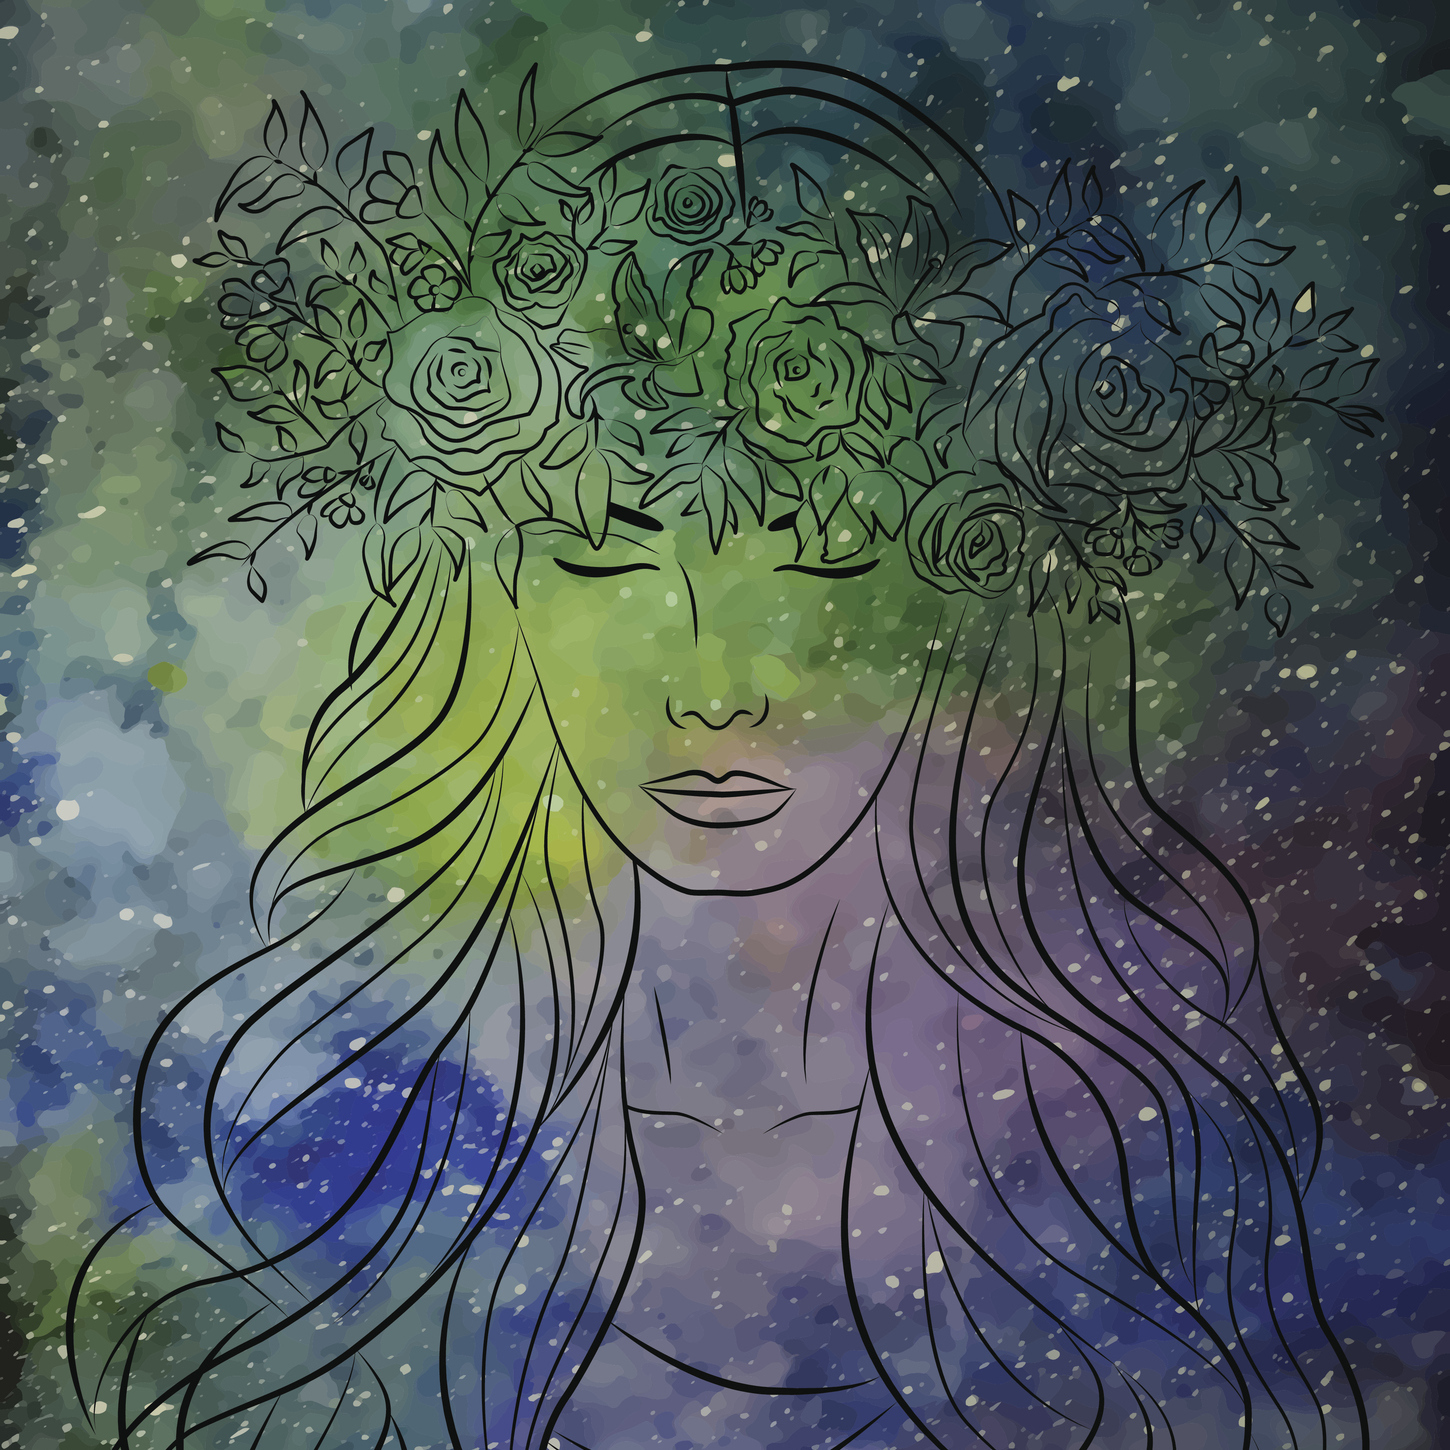 outline of a woman wearing a flower crown against a night sky with lots of stars